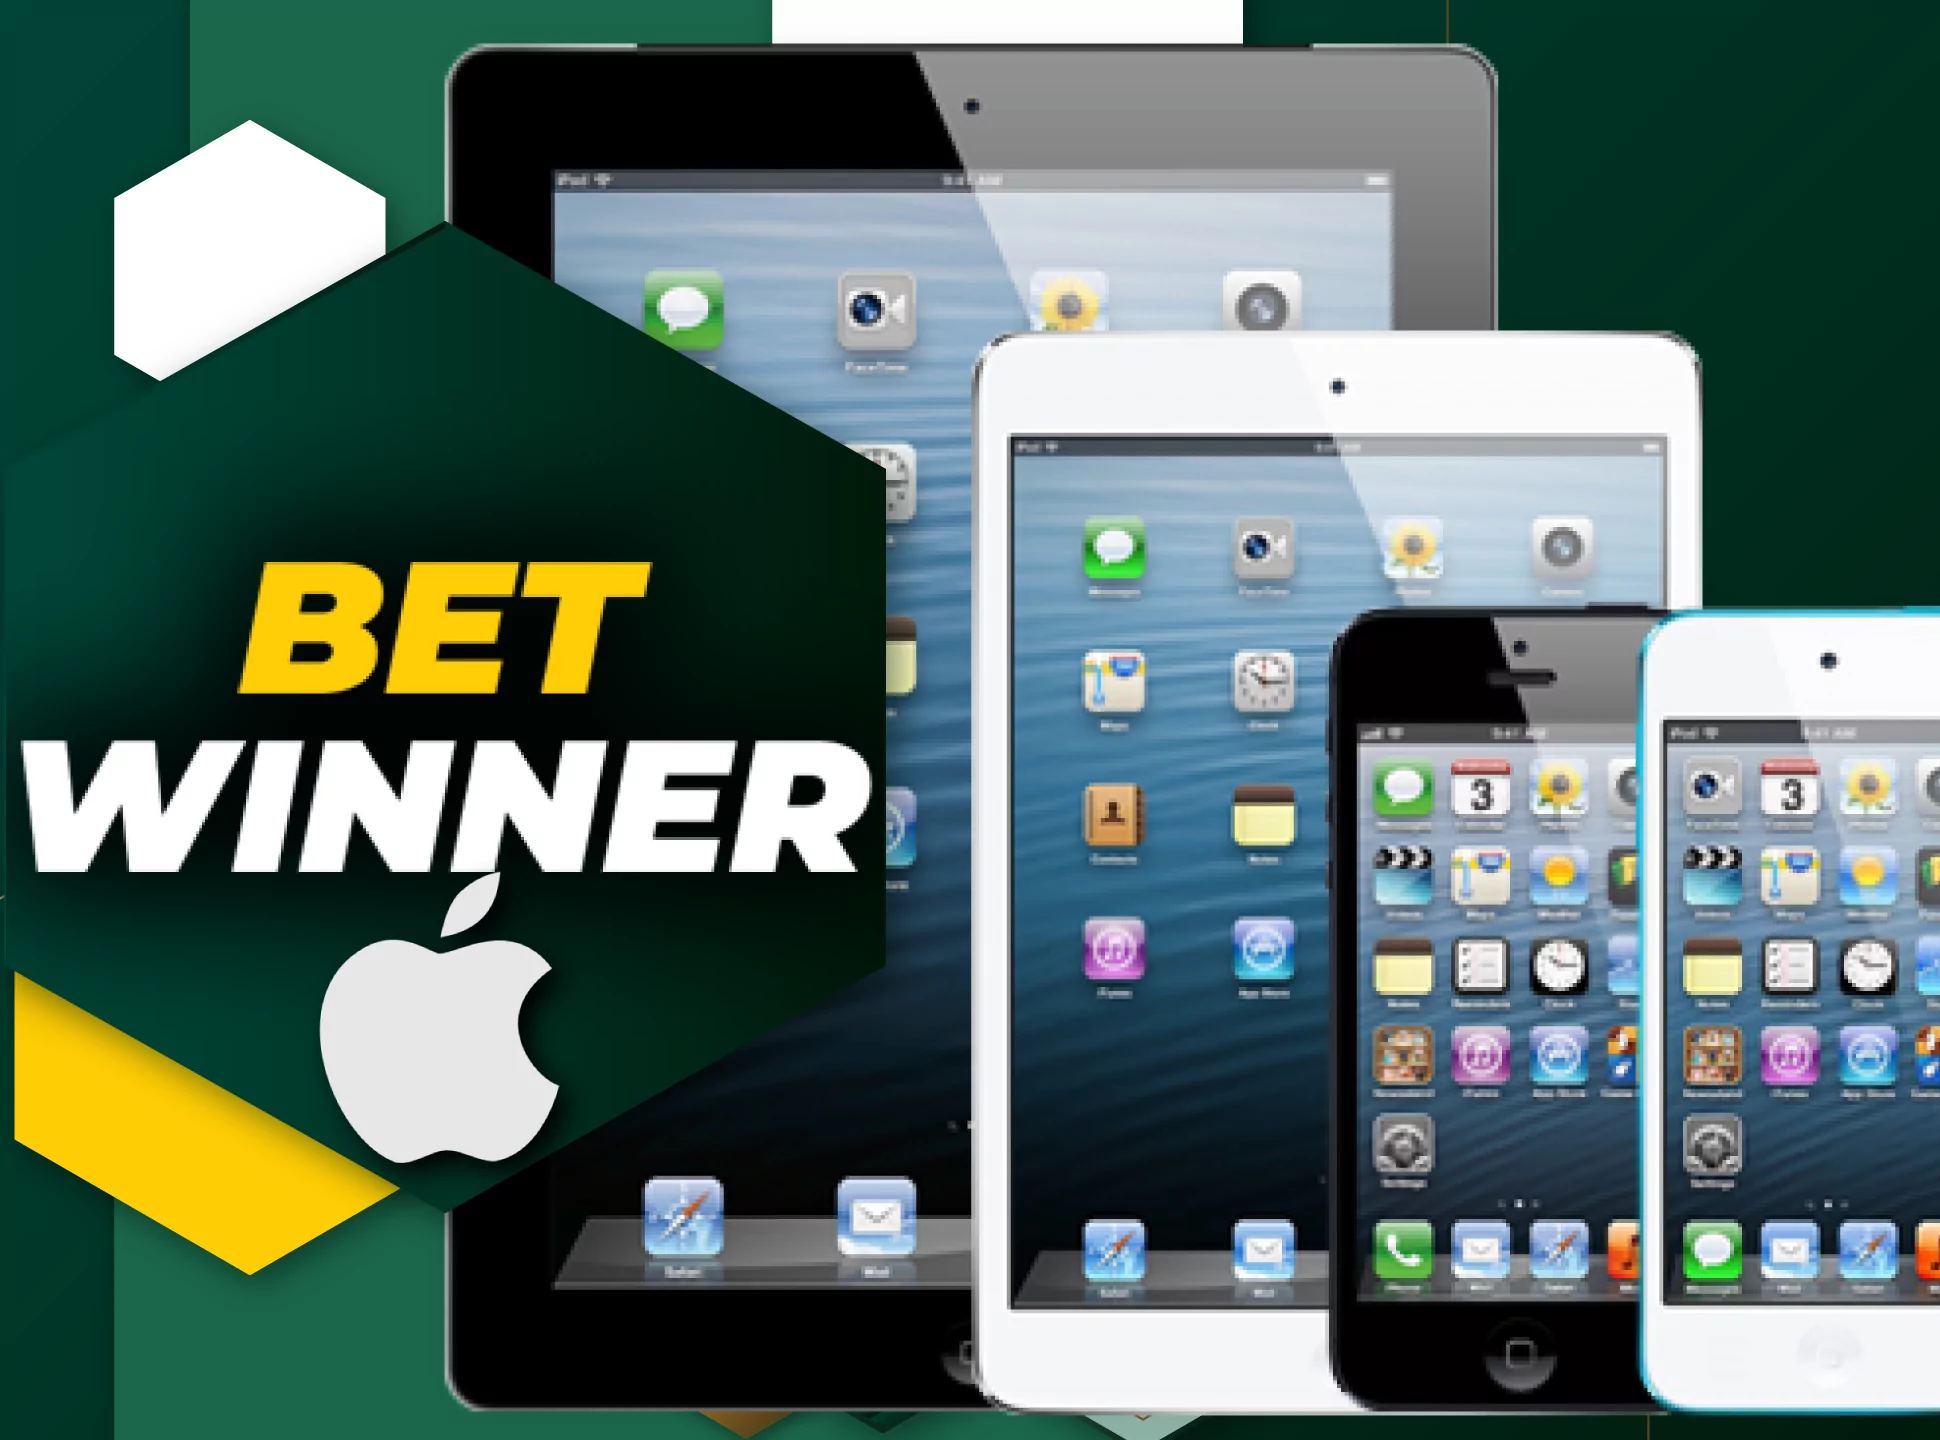 Install Betwinner app on your iOS device.